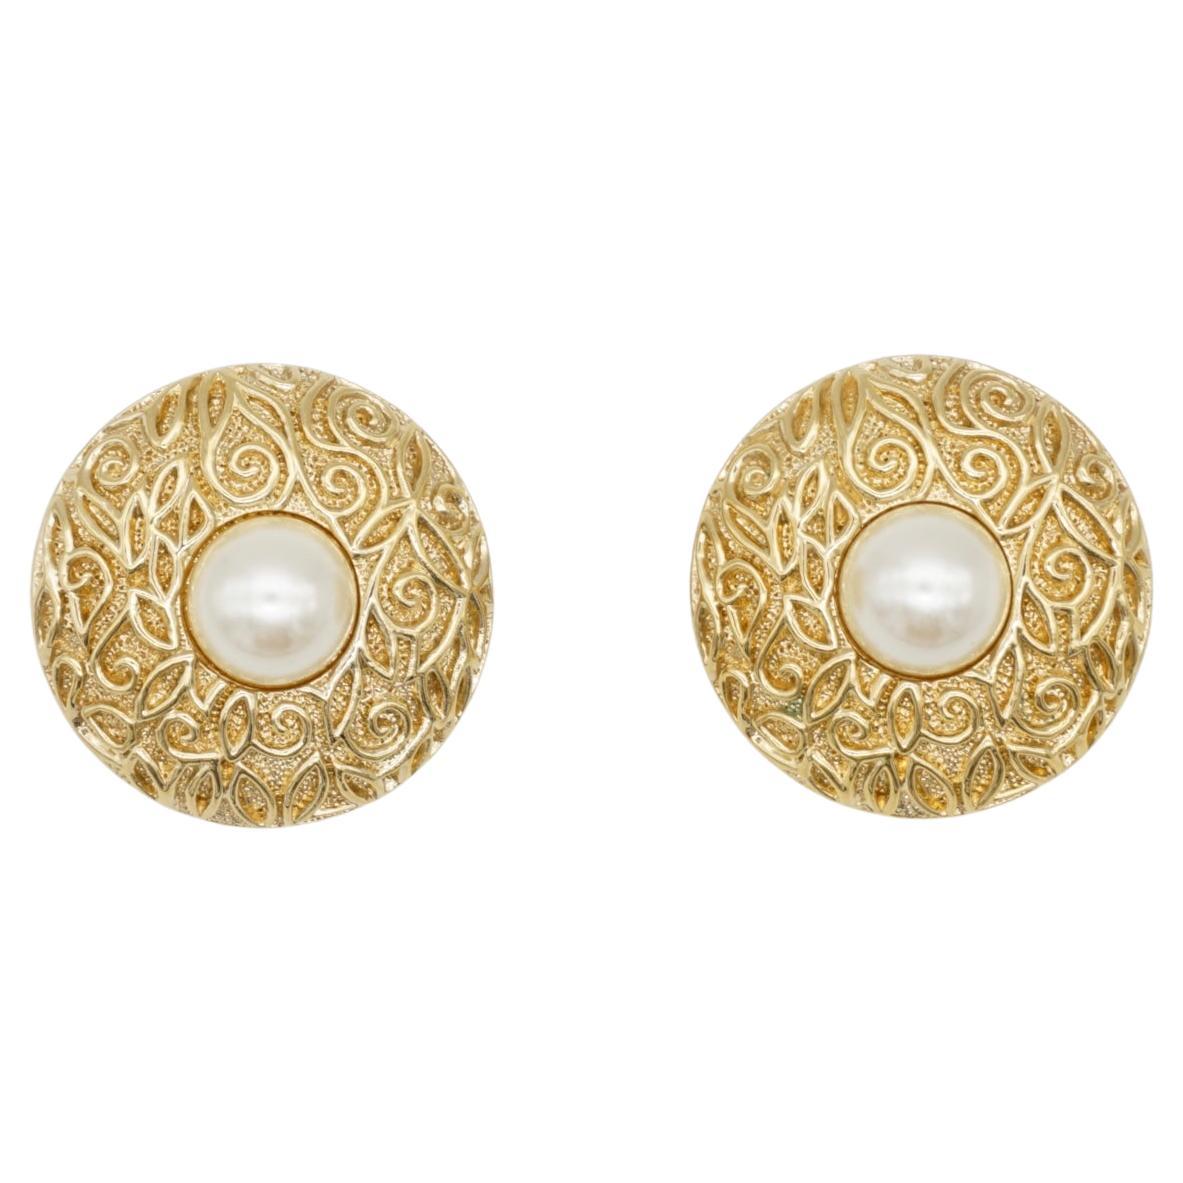 Christian Dior Vintage 1980 Large Round Relief Flower White Pearl Clip Earrings For Sale